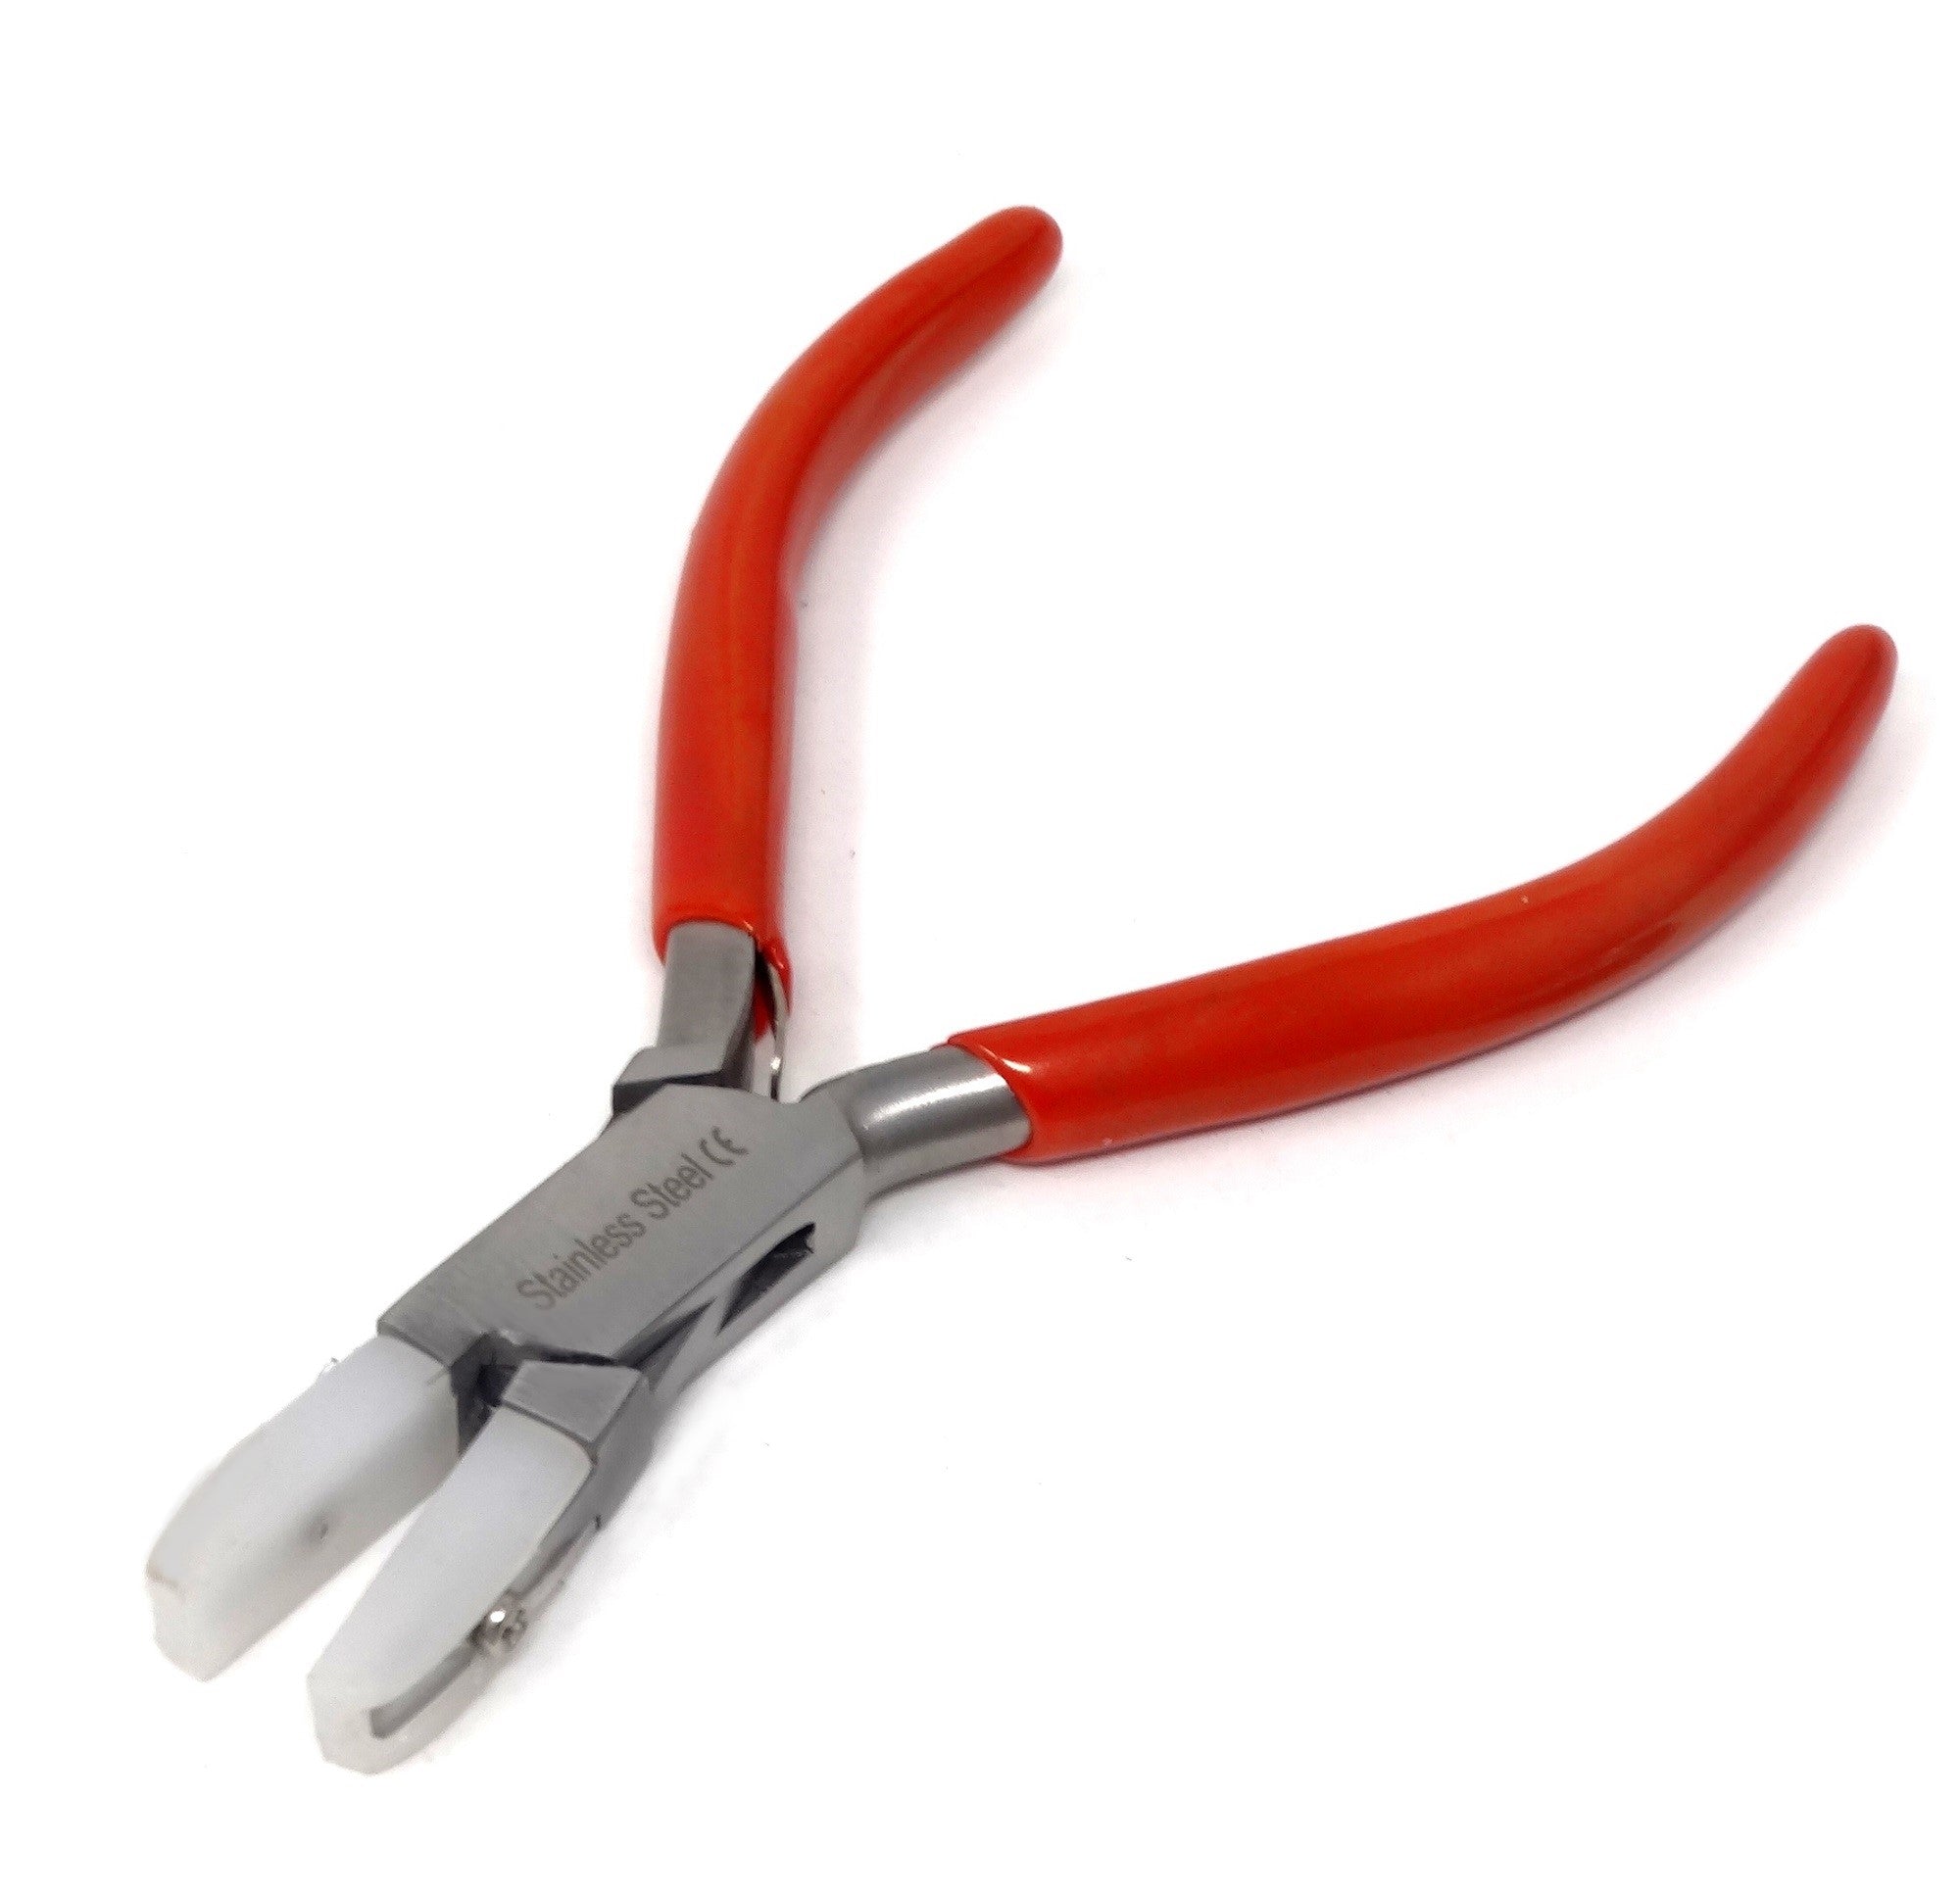 4-1/2 Flat Nose Nylon Jaw Non-Marring Pliers Glitter Line Jewelry Making  Tool